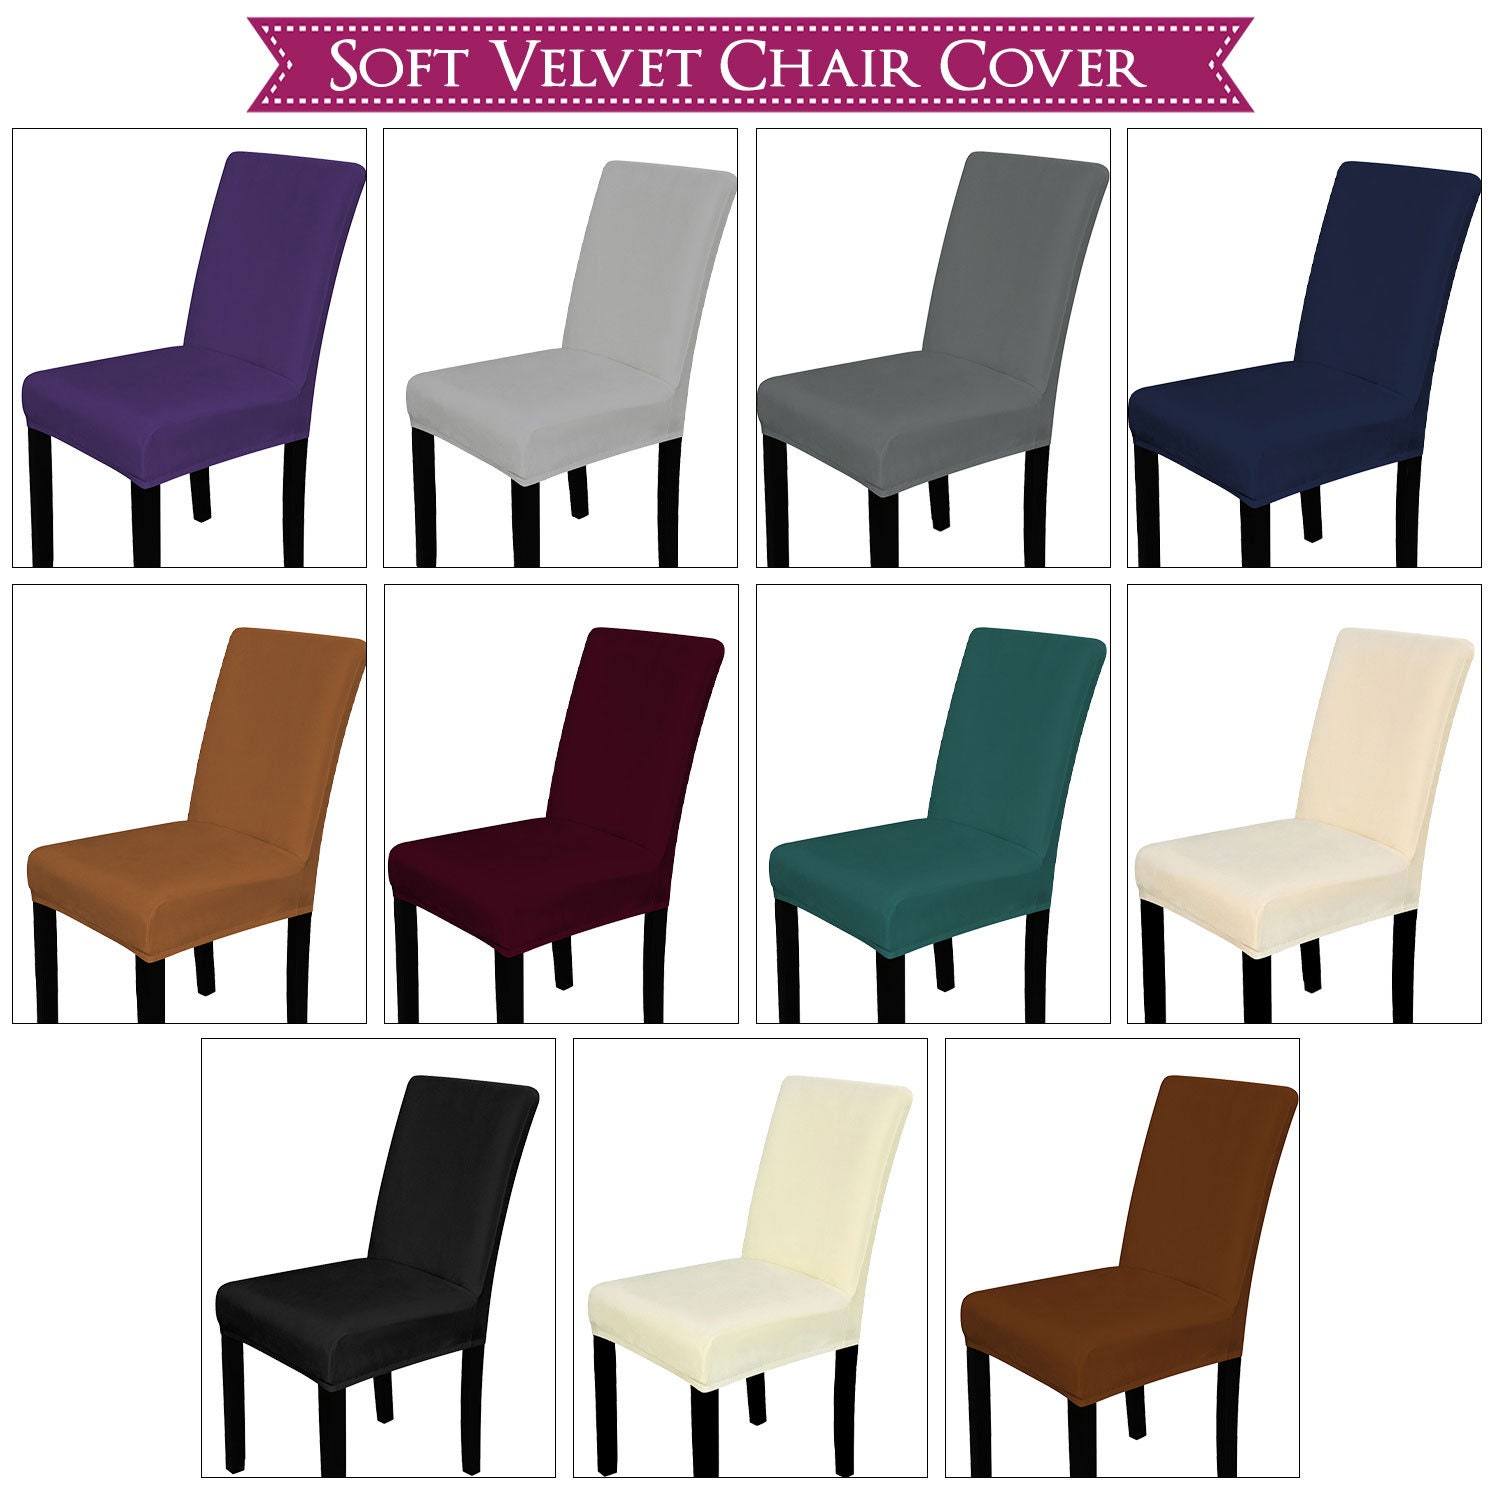 RDTRAVEL Thick Velvet Chair Cover Dining Chair Slipcover Elastic Stretch Chair Cover Case 